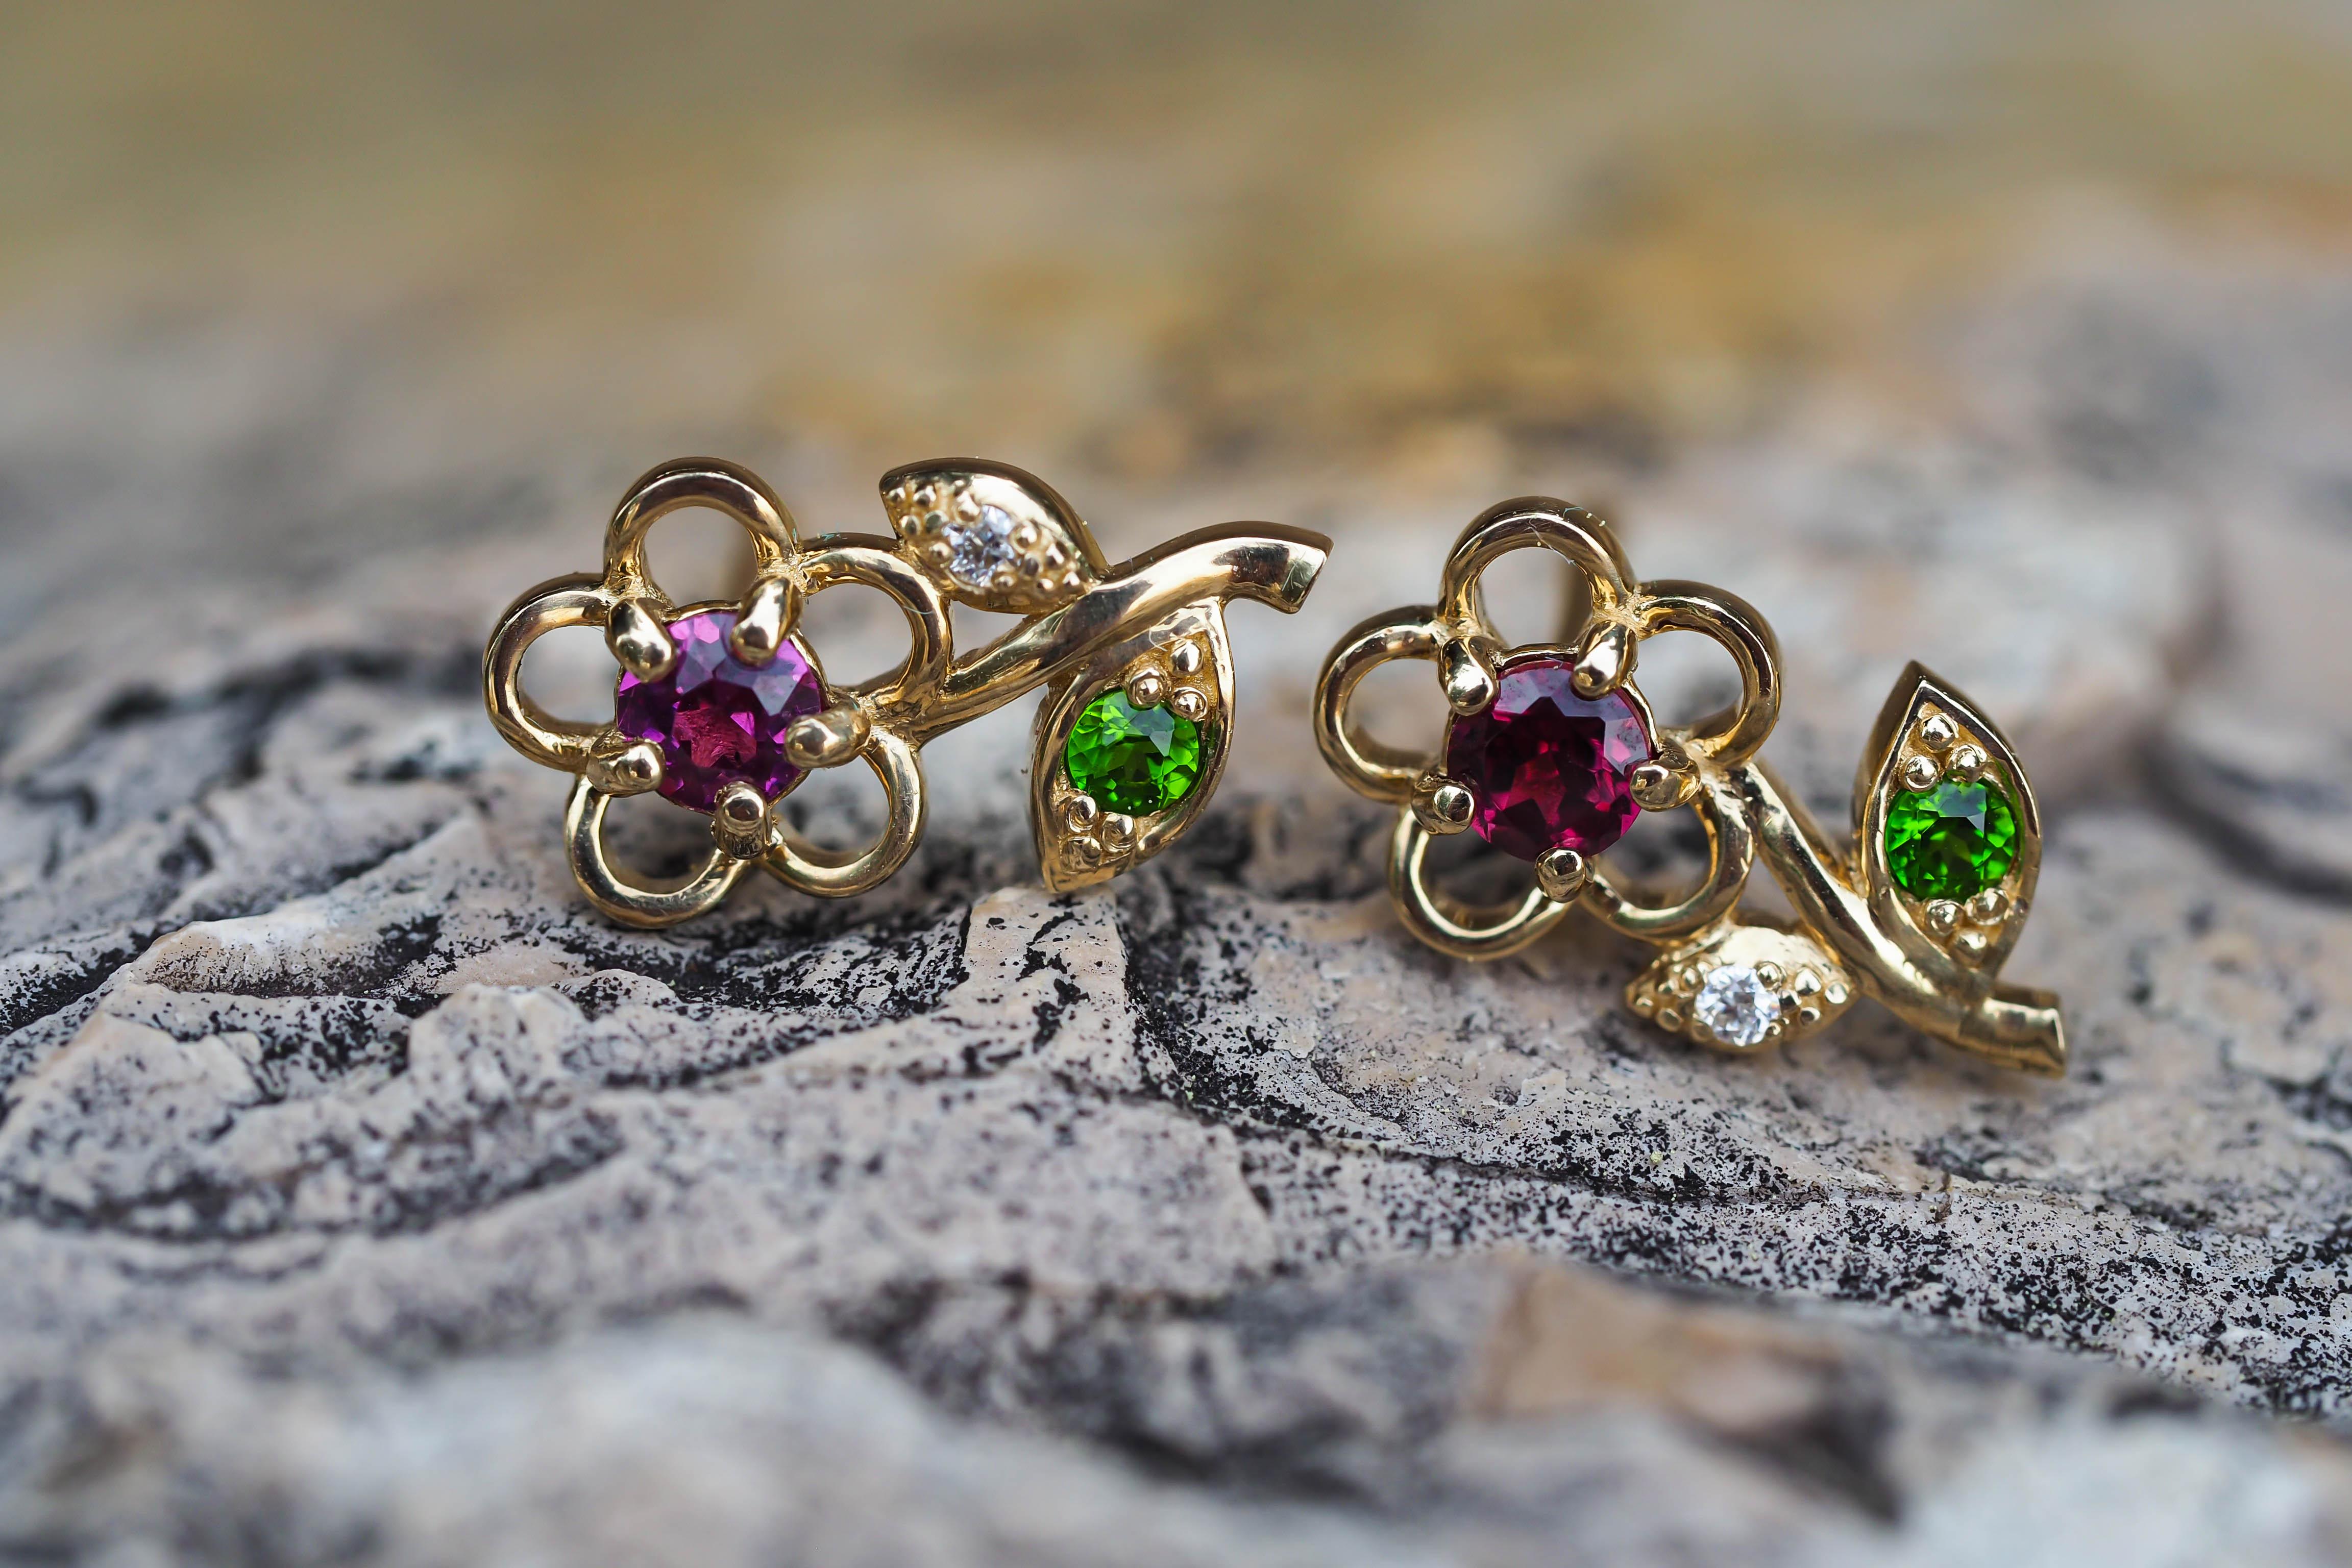 14k gold earrings studs with garnets, tsavorites and diamonds. Flower design studs with multicolor gemstones. Contemporary design earrings.

metal: 14k gold 
weight: 1.75 gr
size: 13x6mm
set with garnets: red and purple color, round cut, clarity